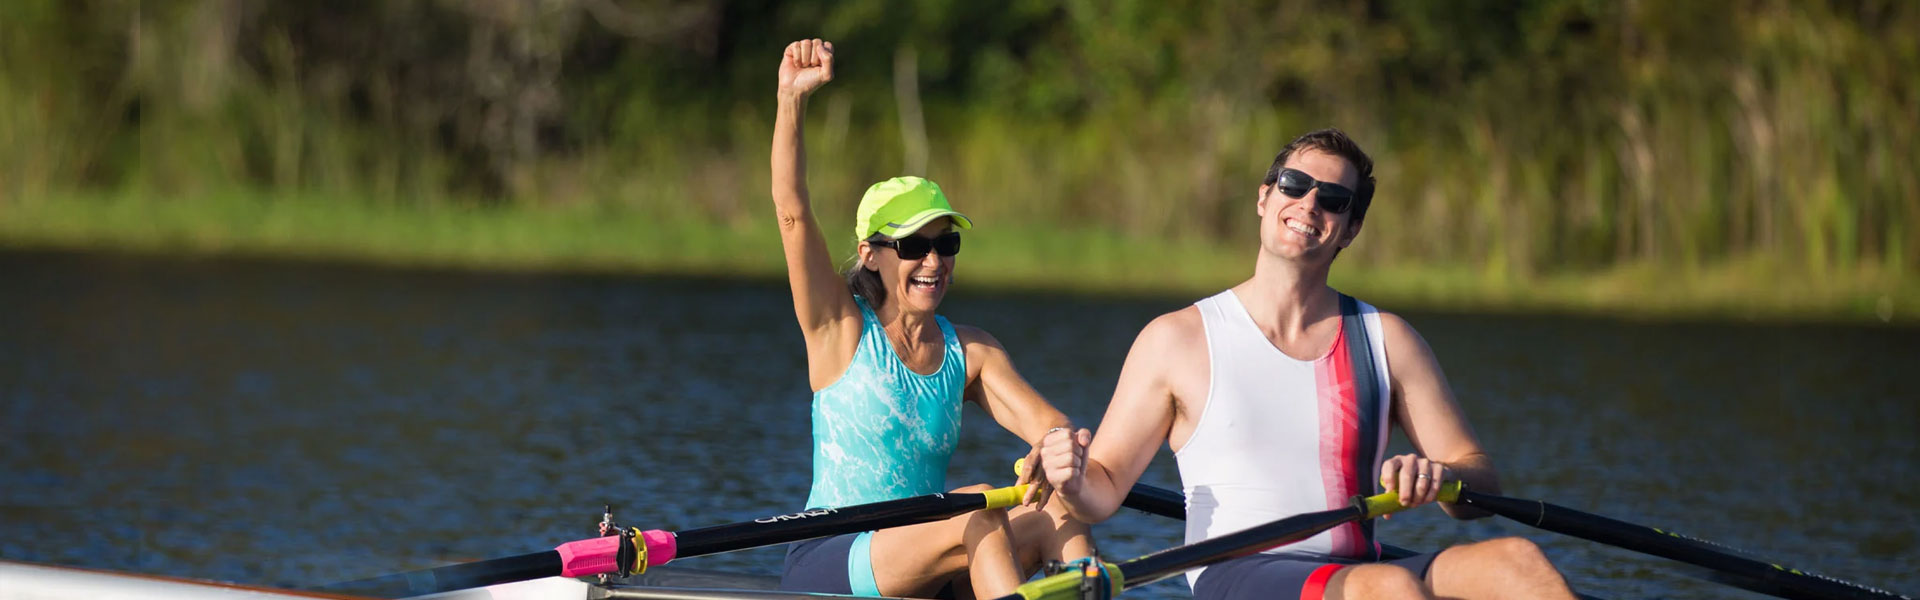 Rowing Uniform Manufacturers in Gold Coast-Tweed Heads